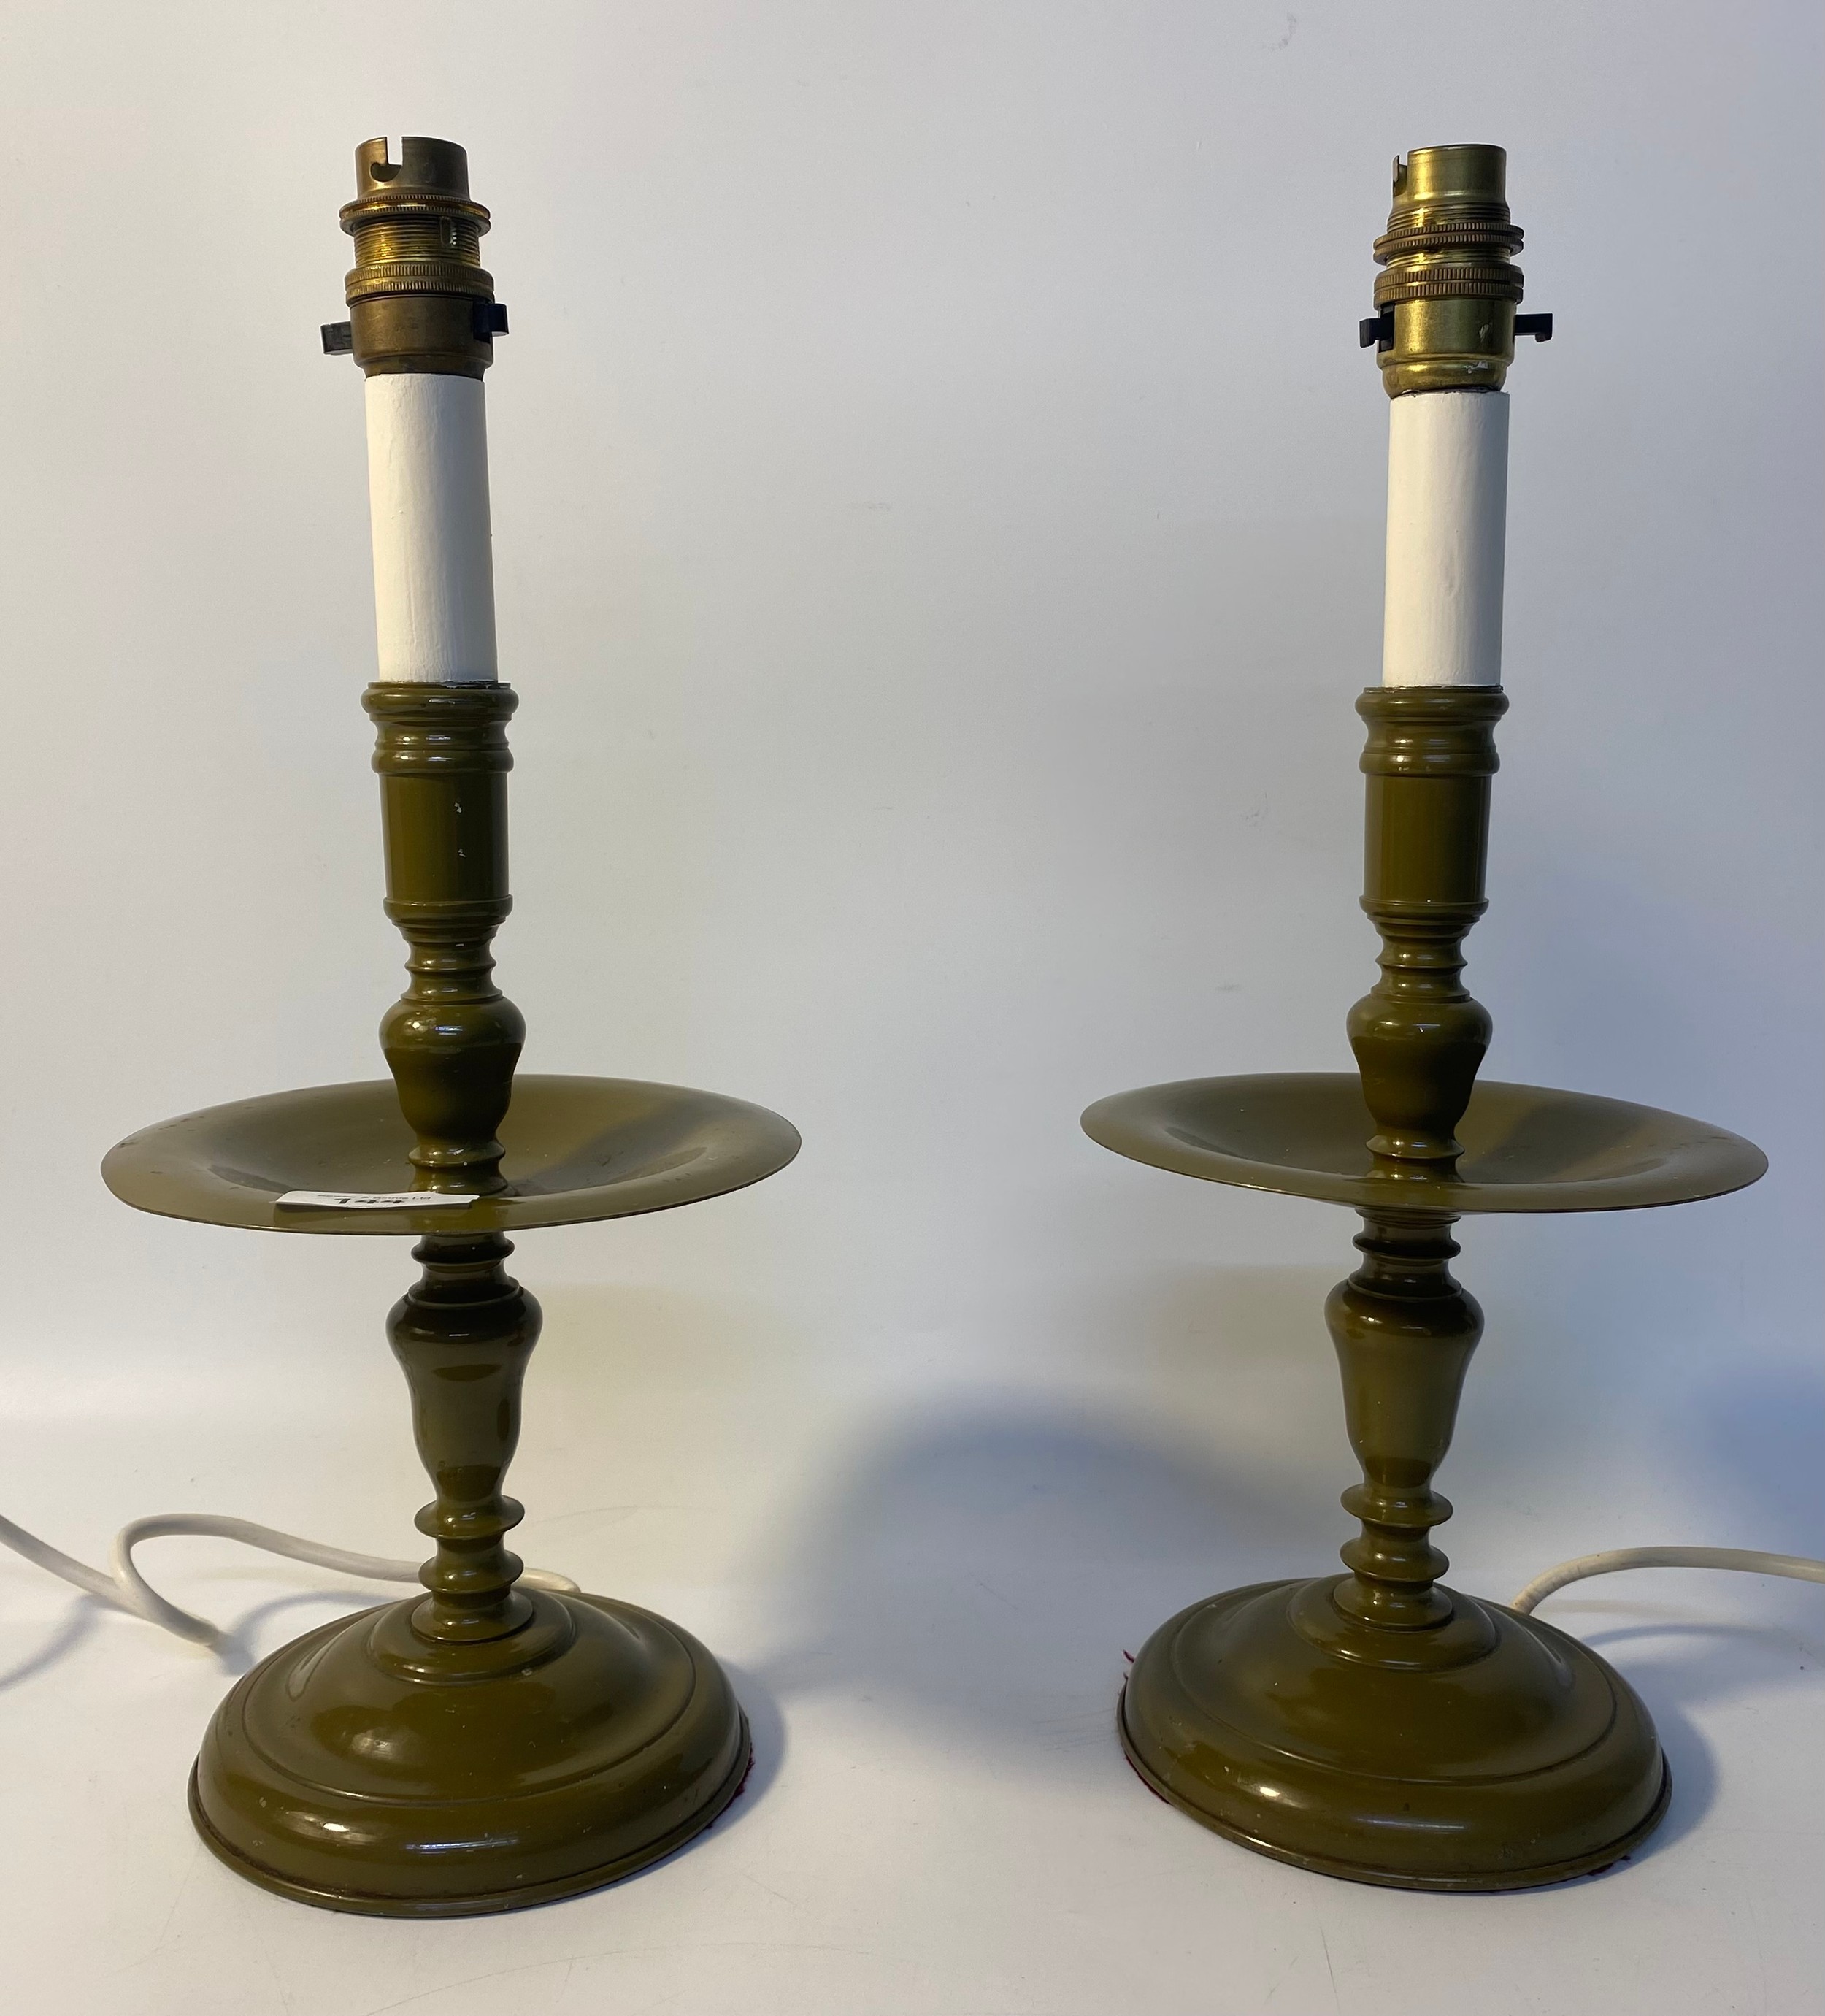 A Pair of 1930/40s enamelled industrial candle sticks [Converted to table lamps]